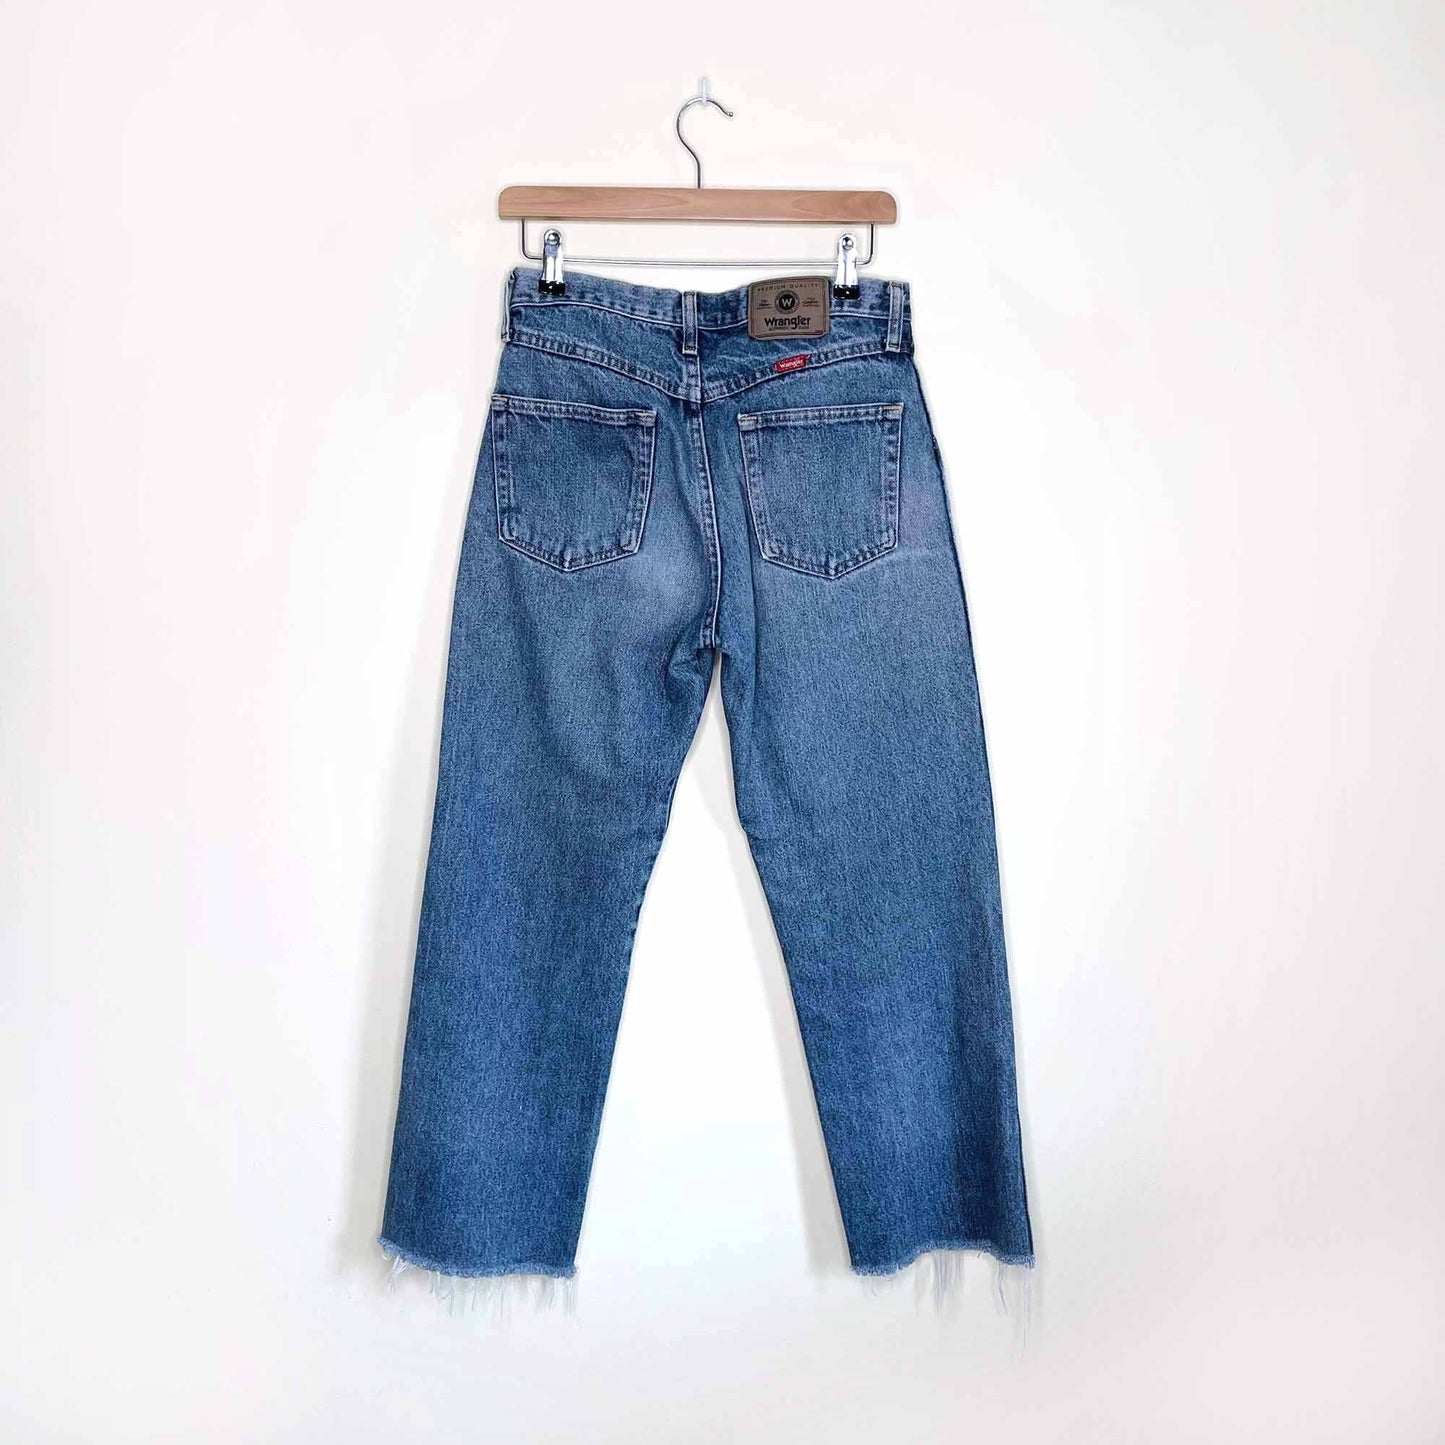 Wrangler high rise cut-off cropped mom jeans - size 30